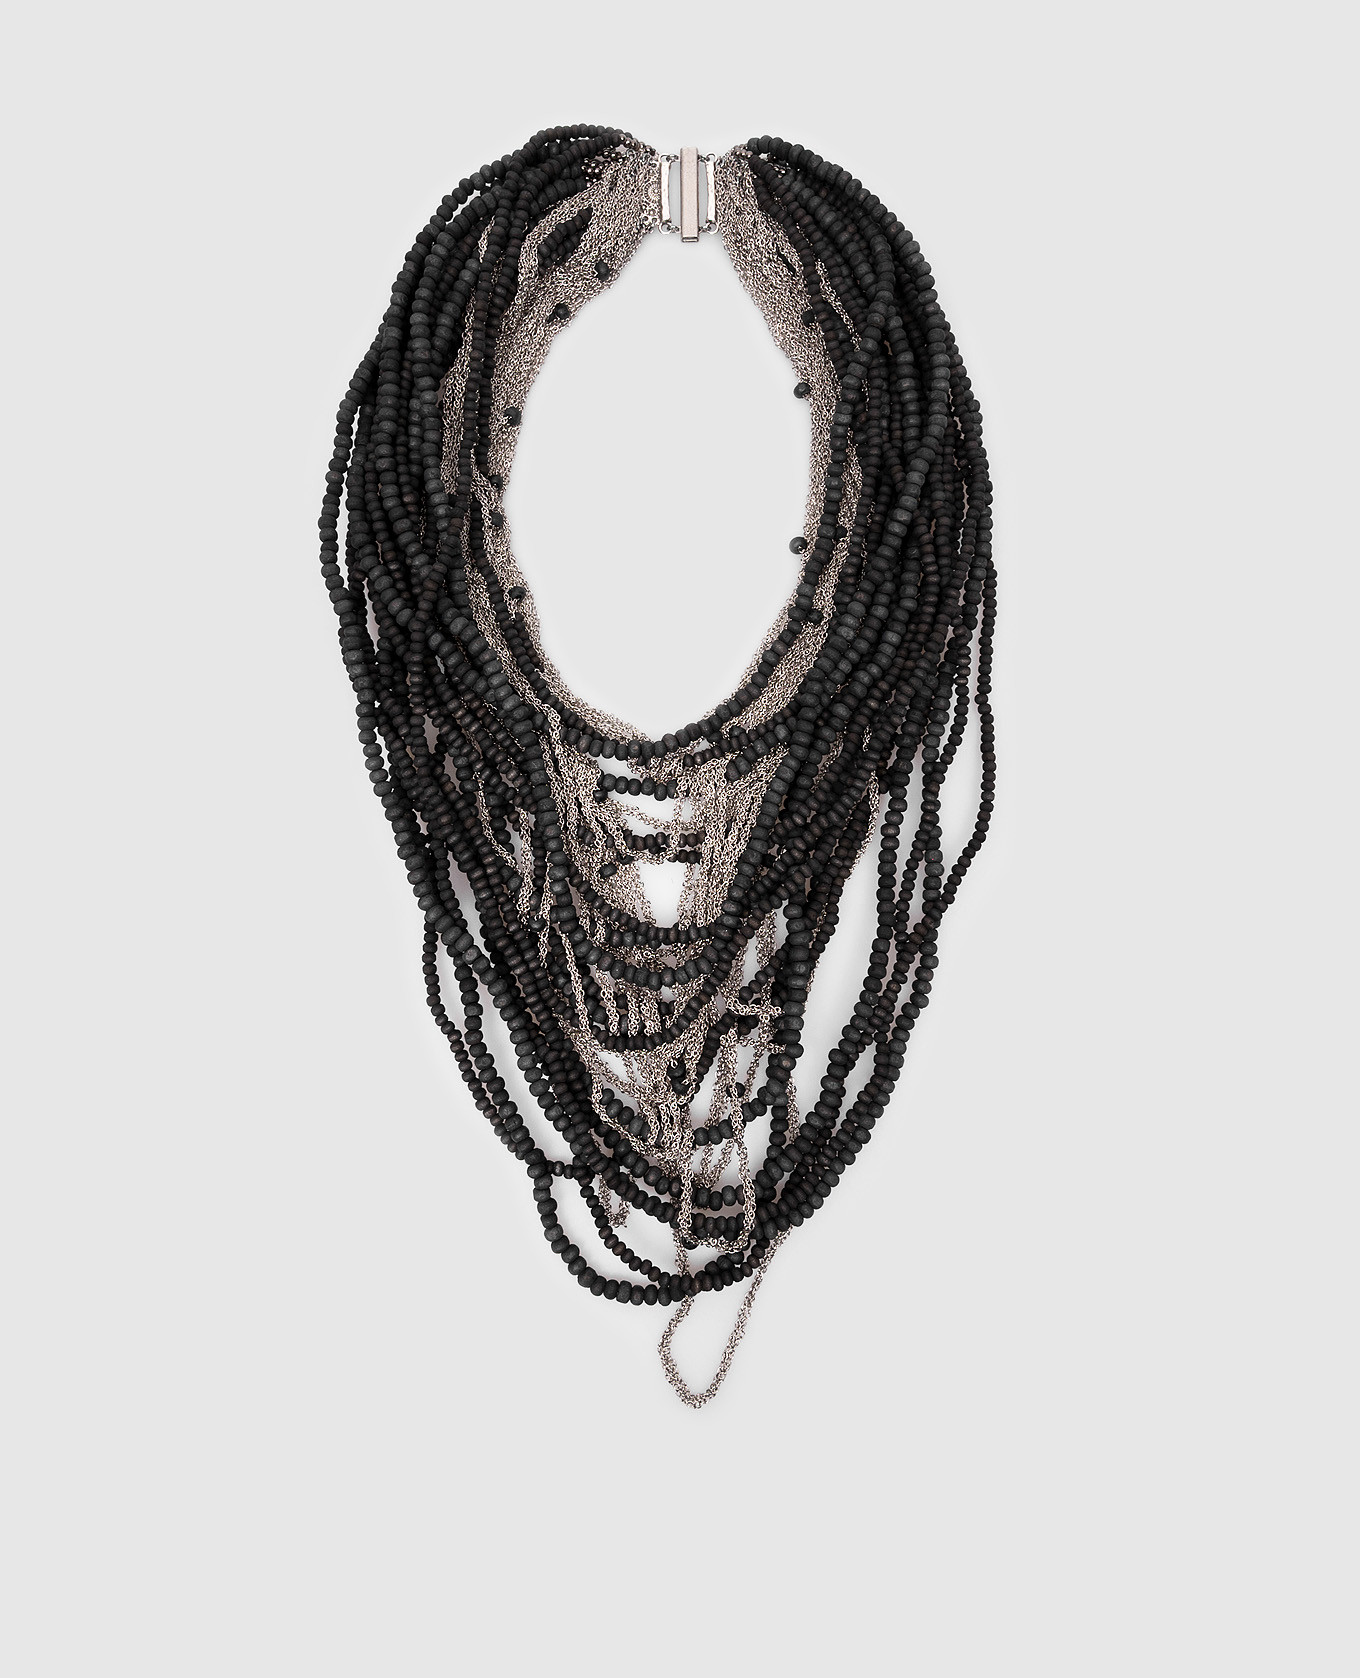 Multi-layered necklace